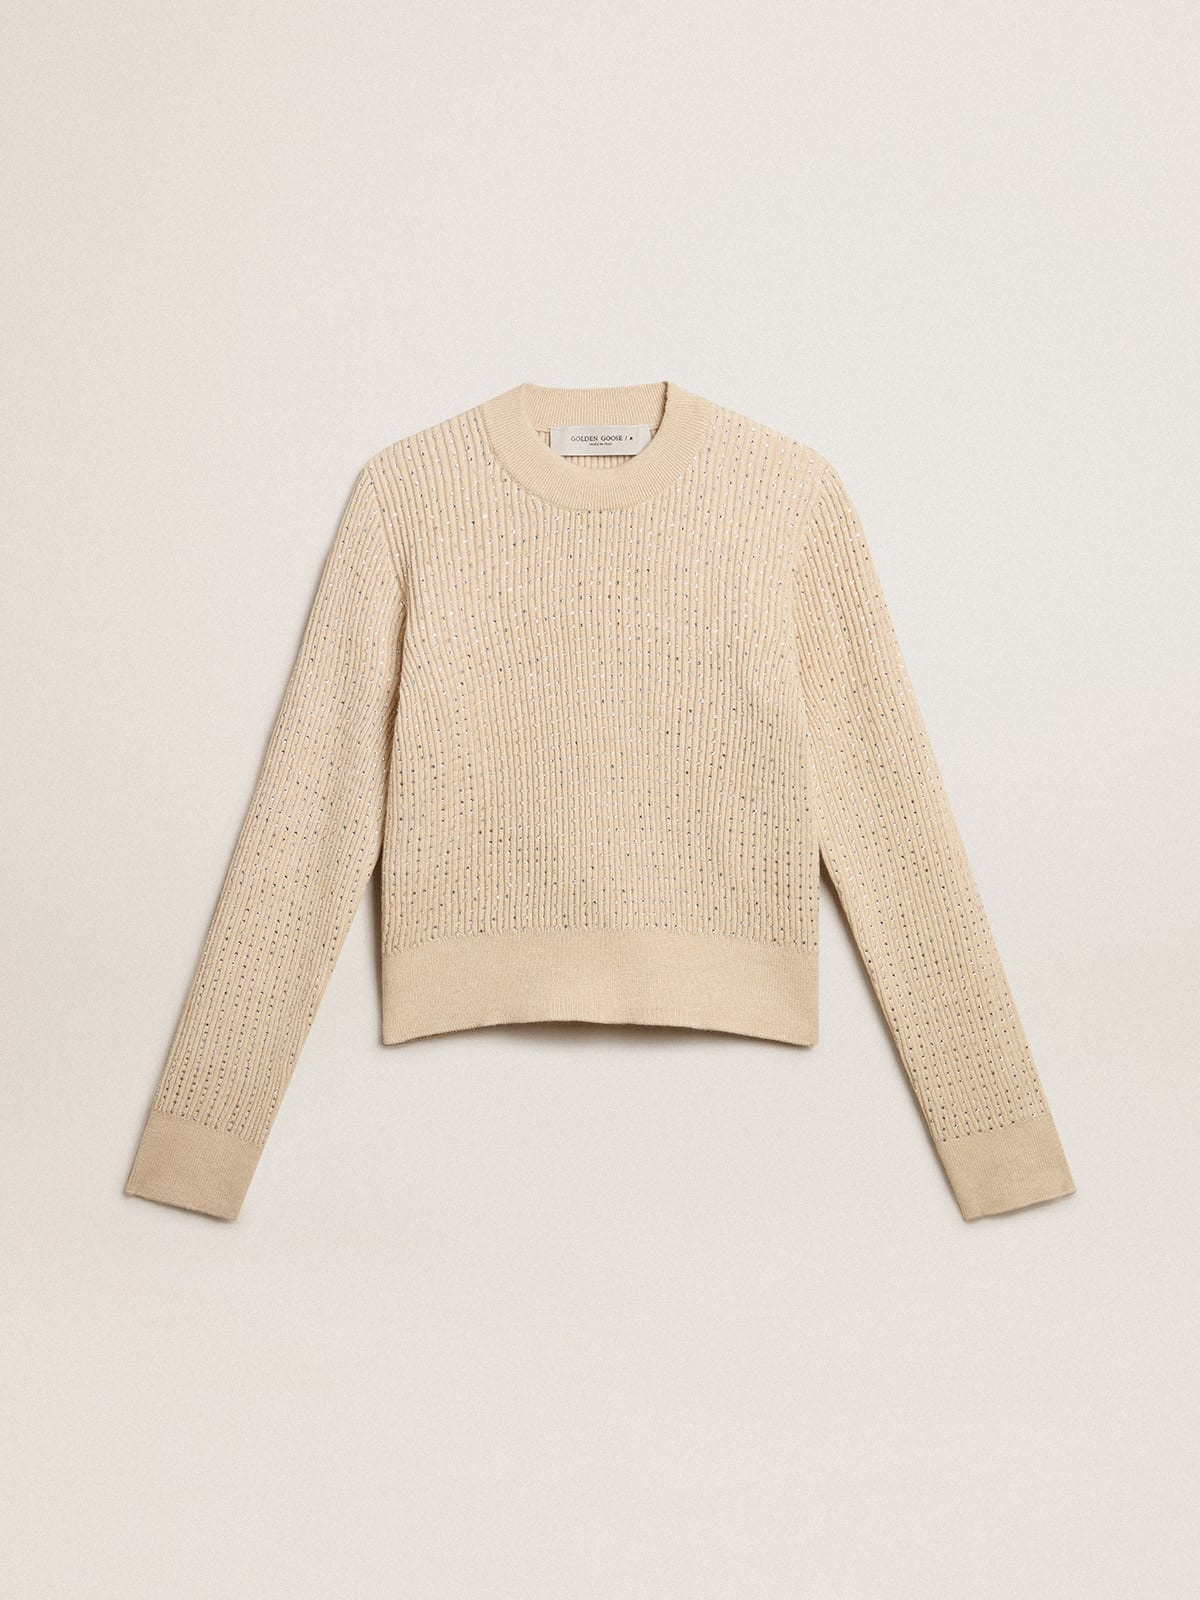 Cropped round-neck sweater in beige wool with all-over crystals